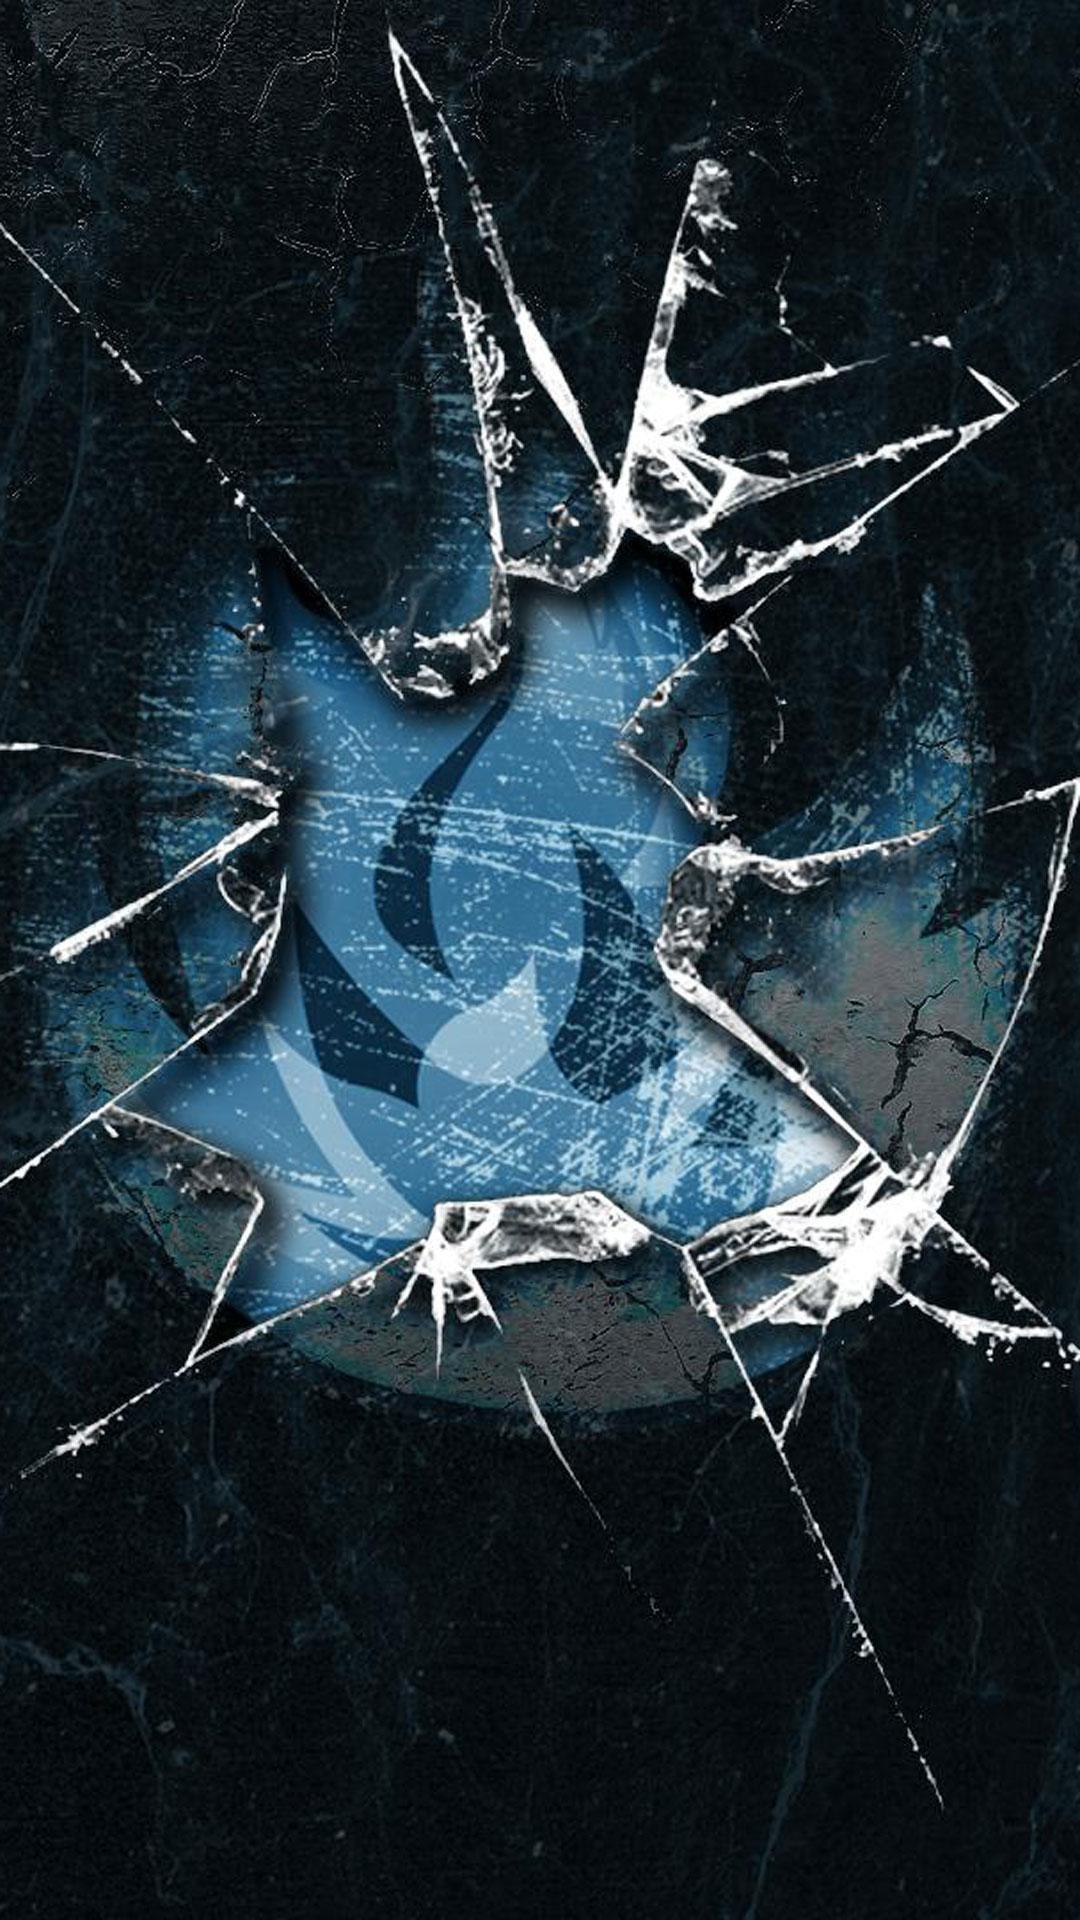 Cracked Screen Live Wallpaper for Android